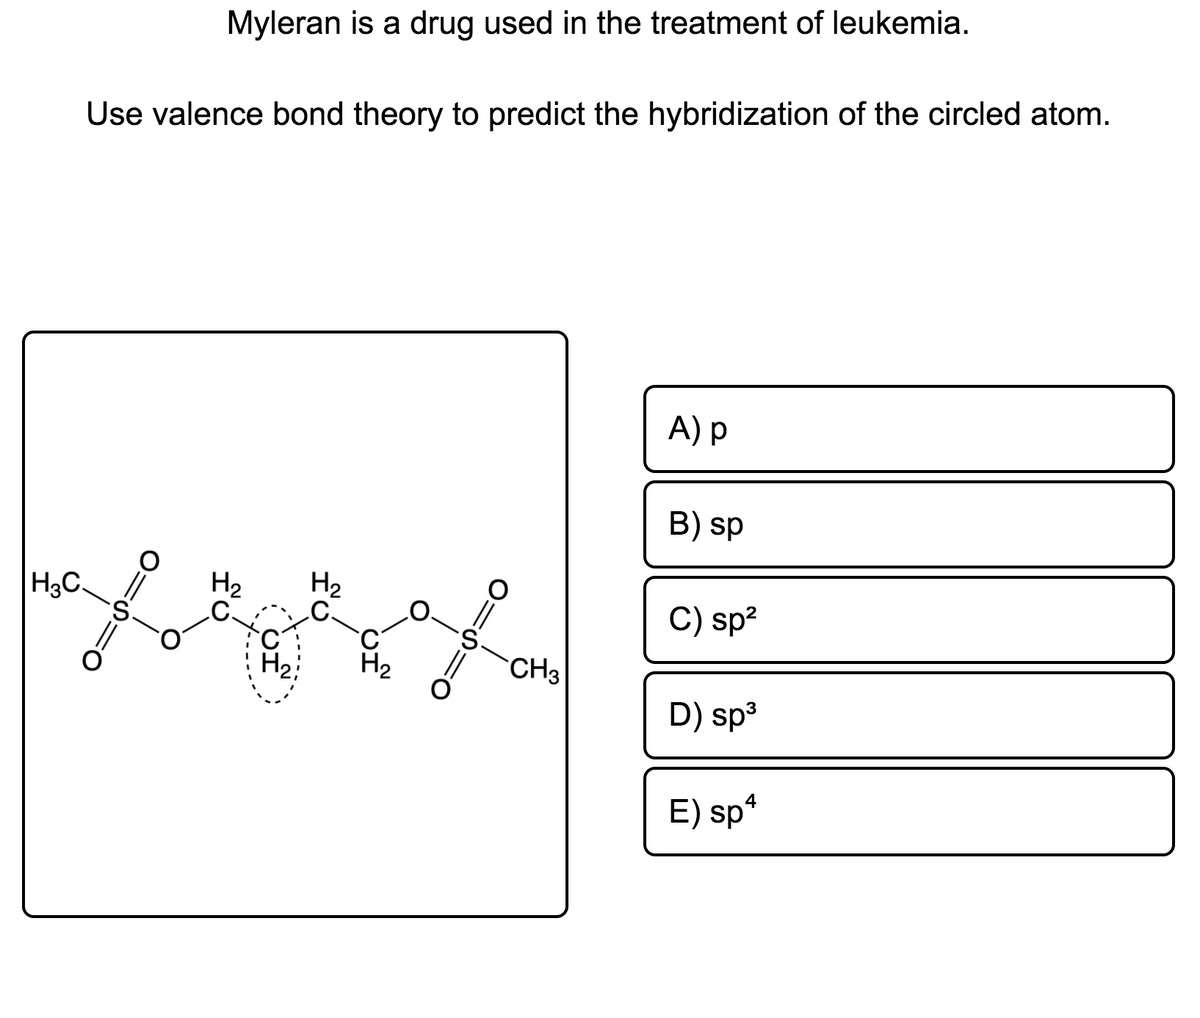 Myleran is a drug used in the treatment of leukemia.
Use valence bond theory to predict the hybridization of the circled atom.
A) p
B) sp
H3C
H2
.C.
H2
.C.
C) sp?
CH3
D) sp3
E) sp*
